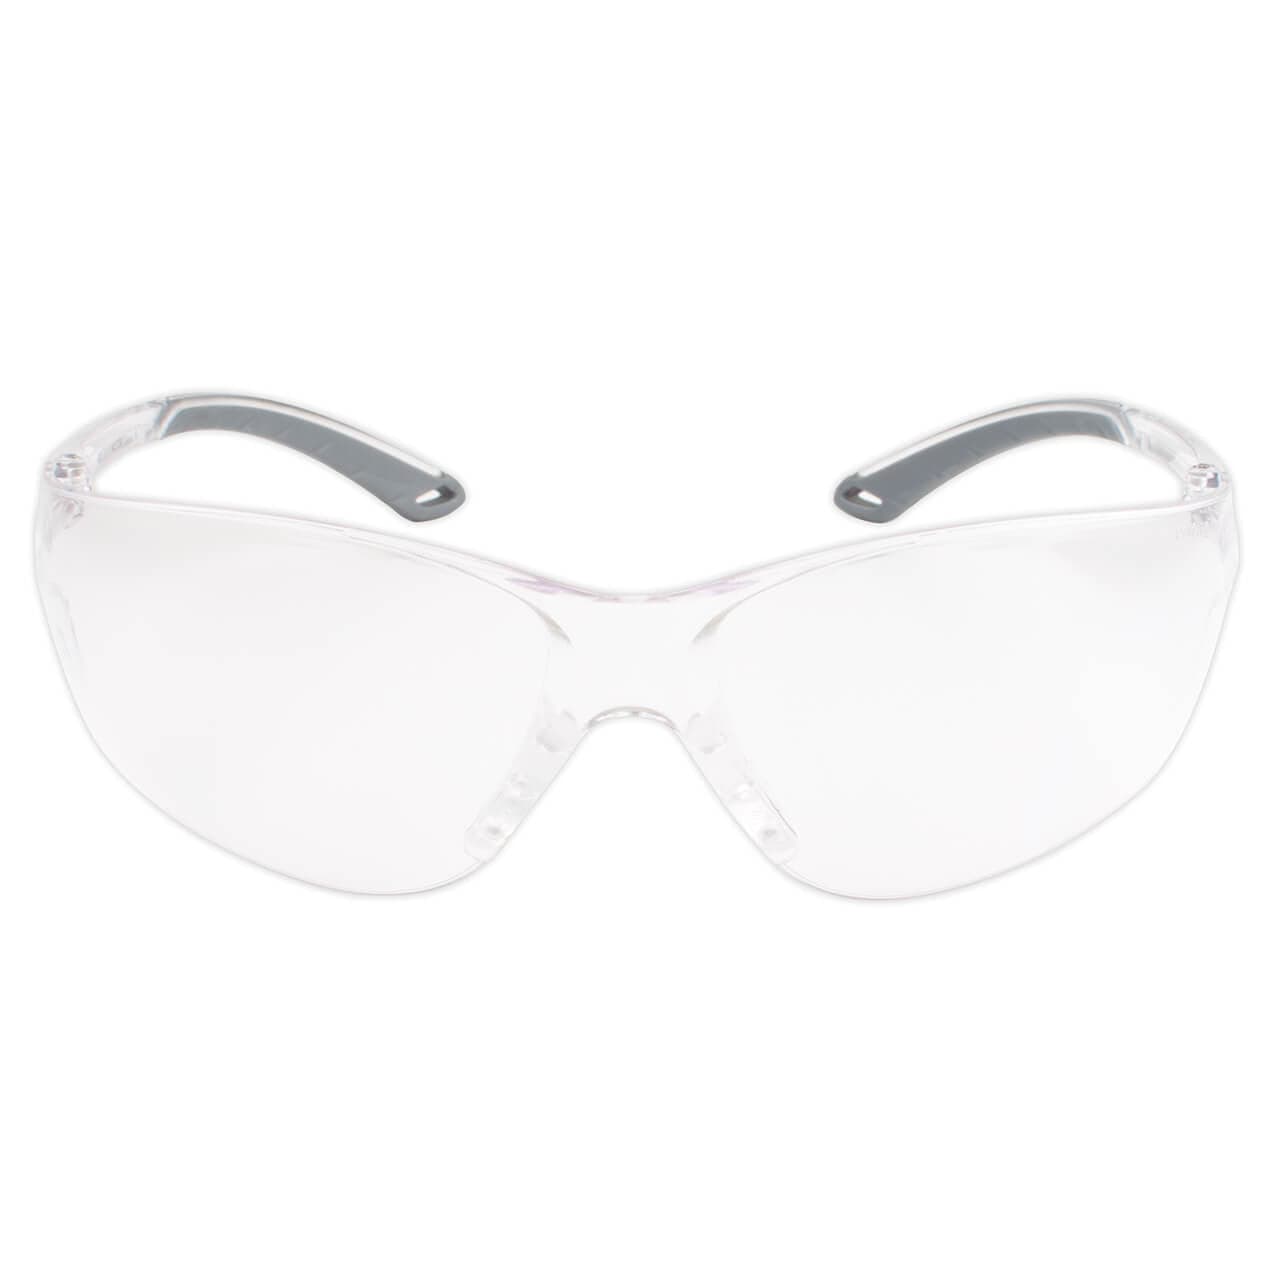 Metel M20 Safety Glasses with Clear Anti-Fog Lenses Front View